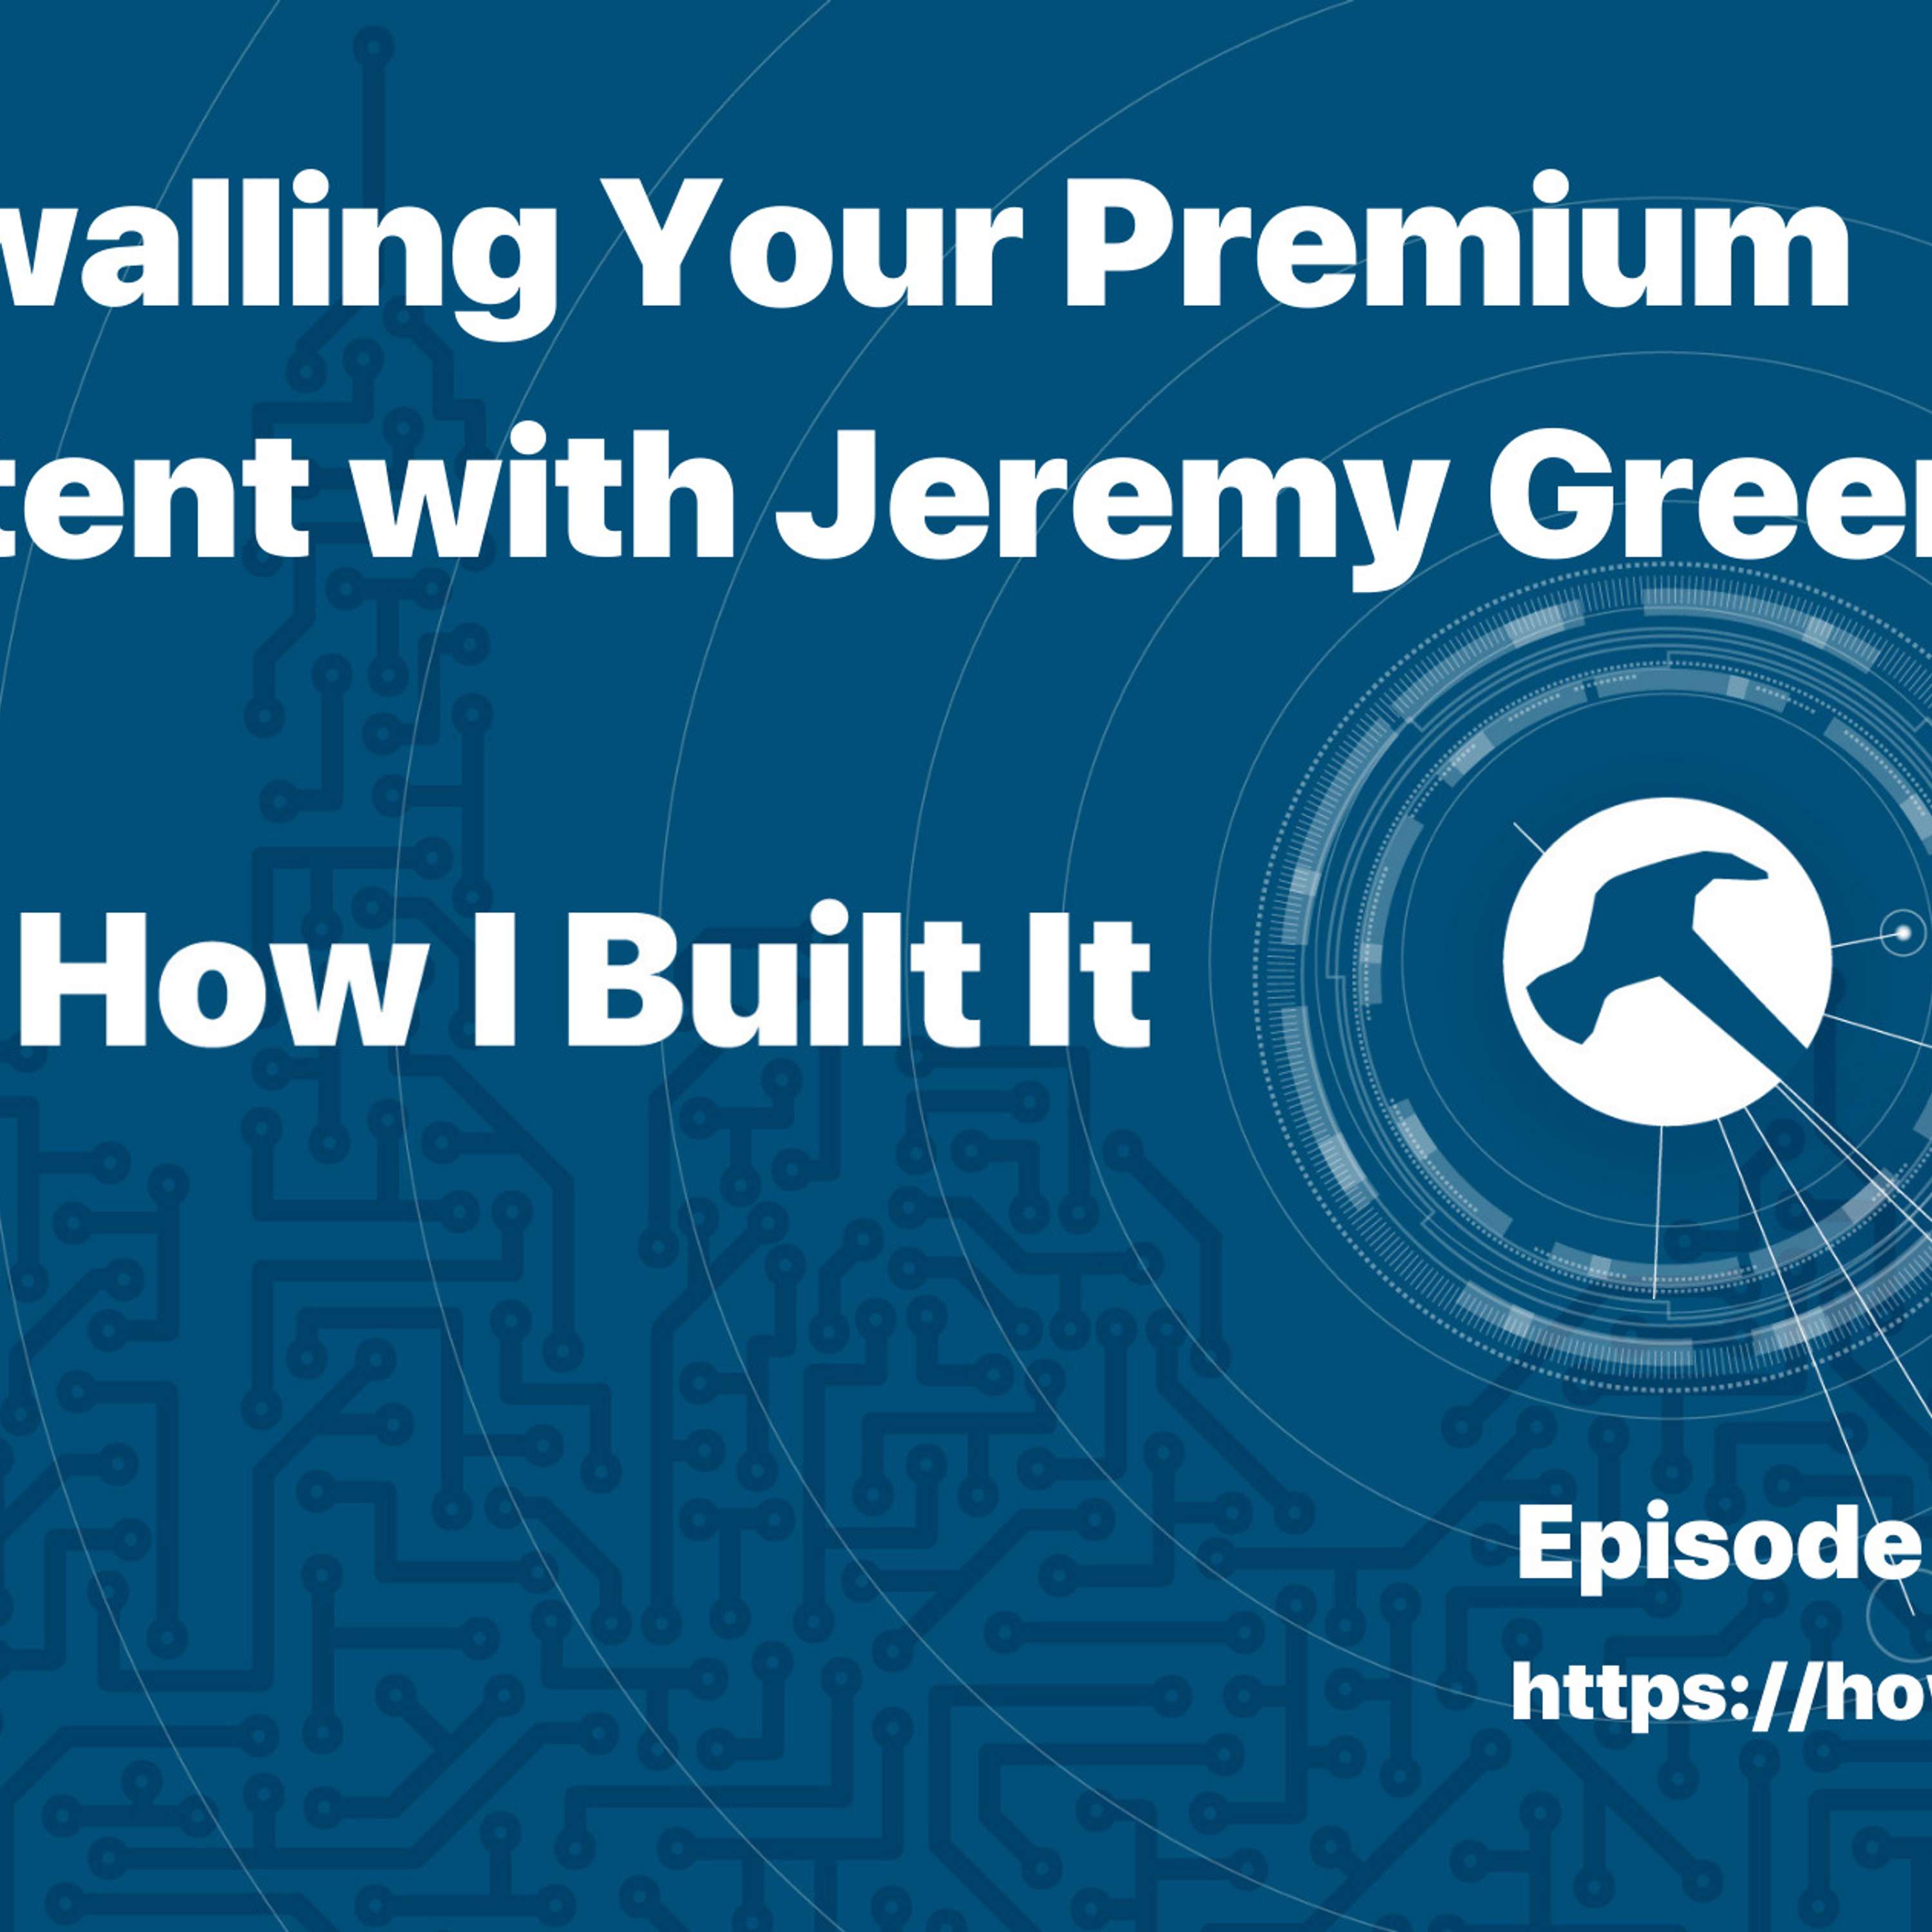 Paywalling Your Premium Content with Jeremy Green